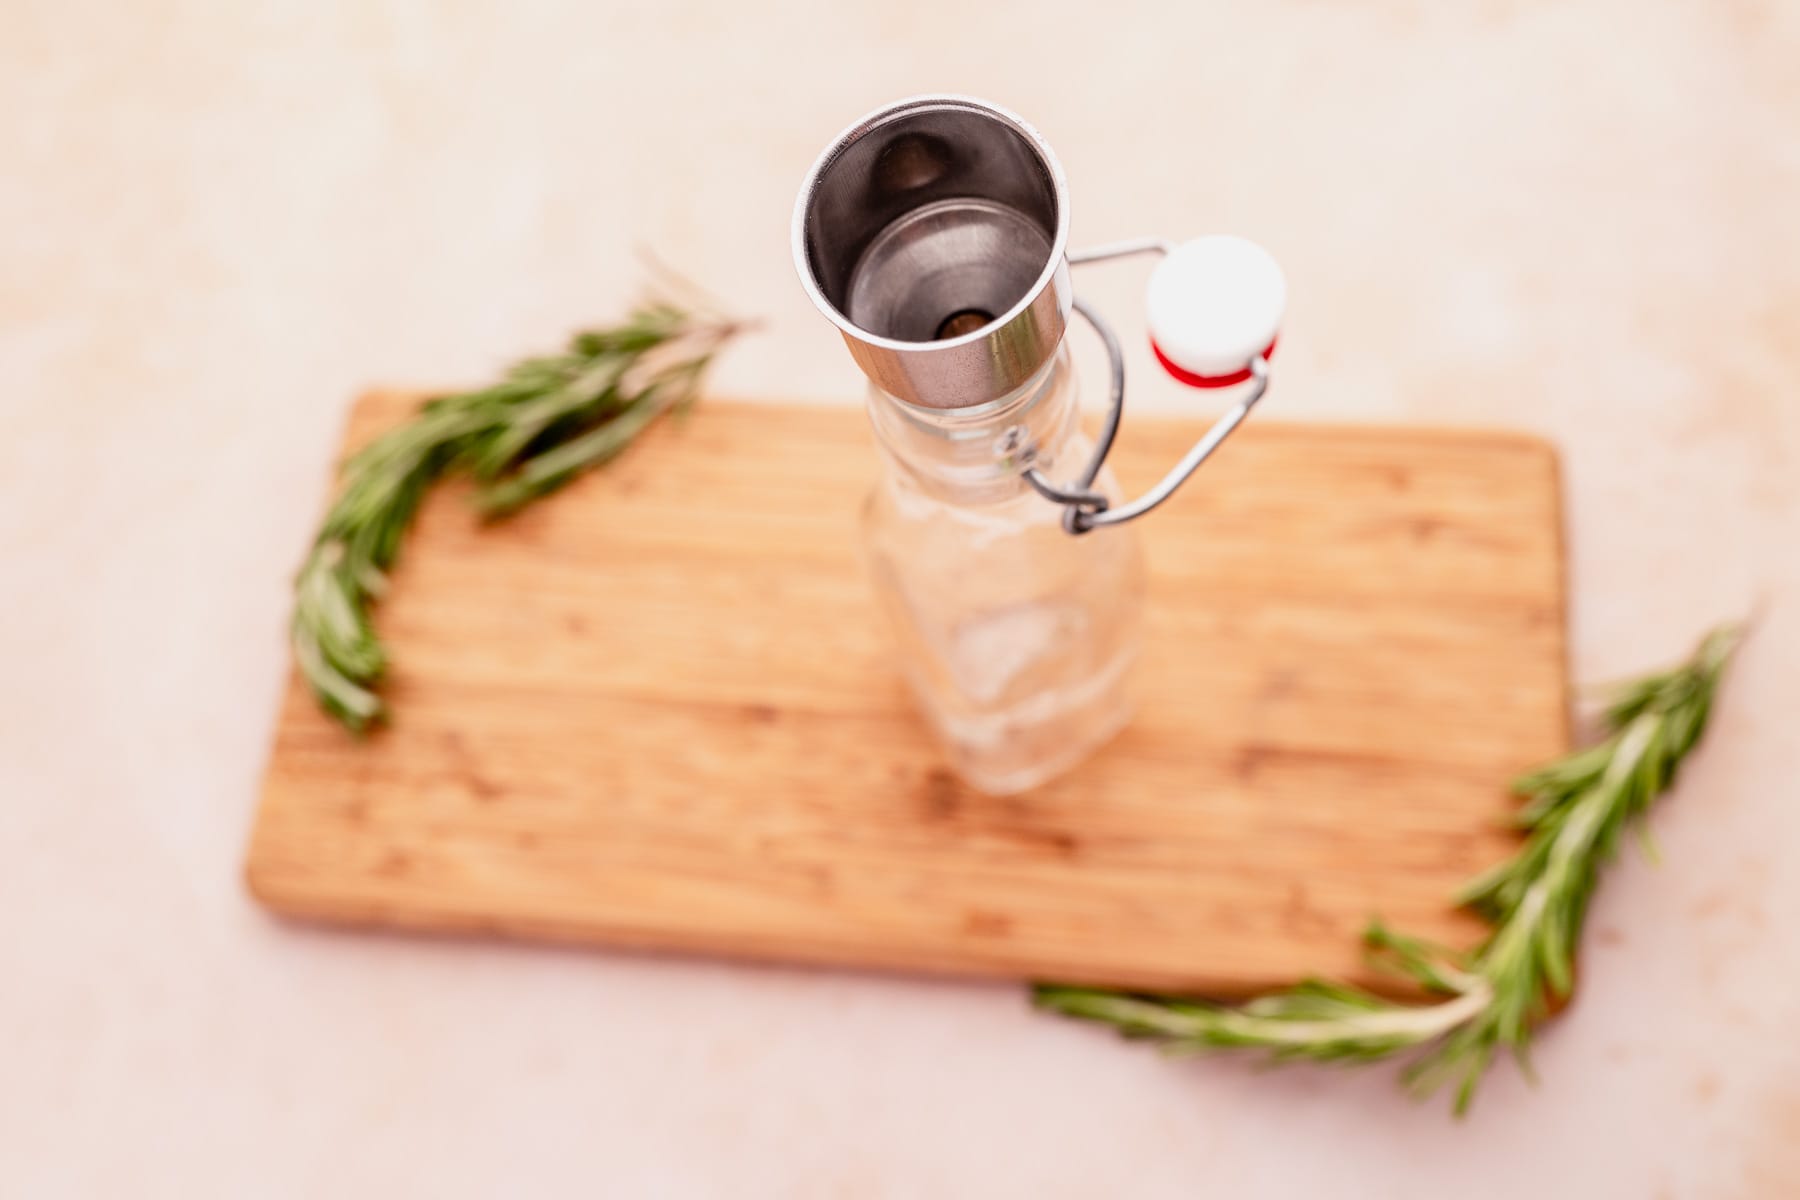 A bottle of olive oil with rosemary sprigs on a wooden cutting board, infused with rosemary.